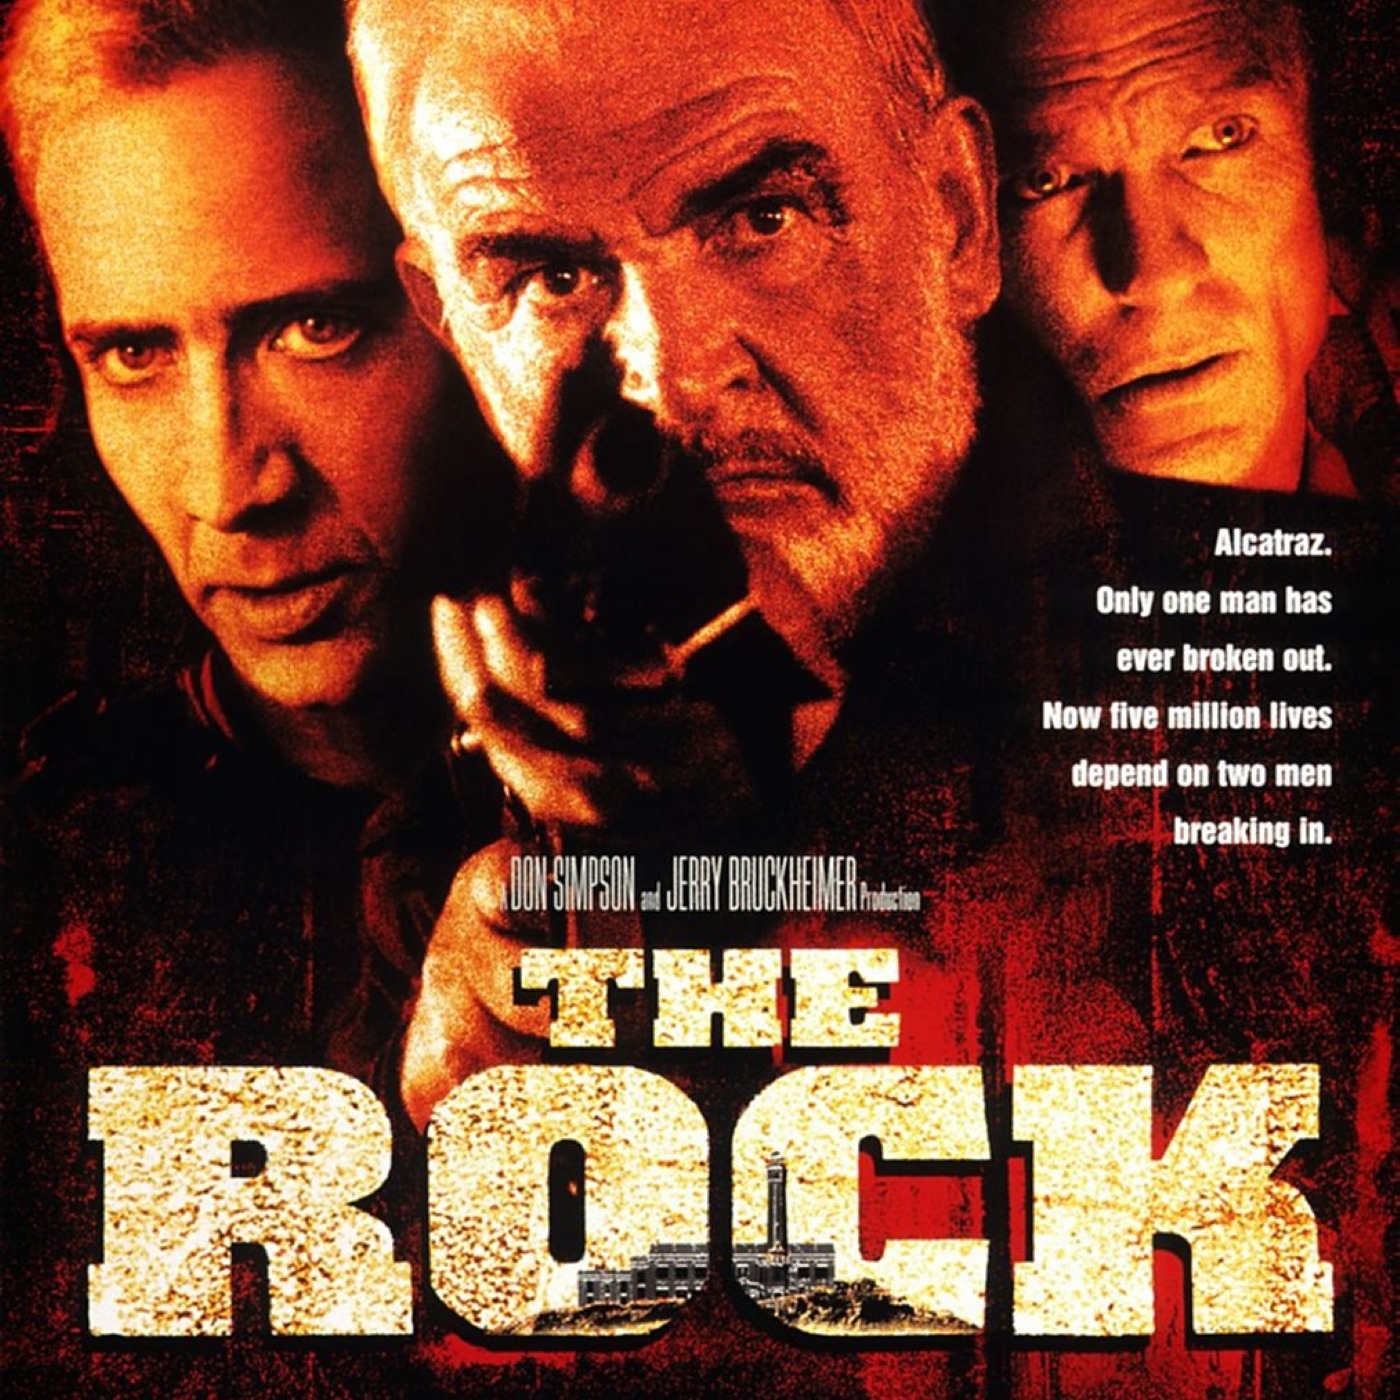 GVN Presents: They Called This a Movie - The Rock (1996)